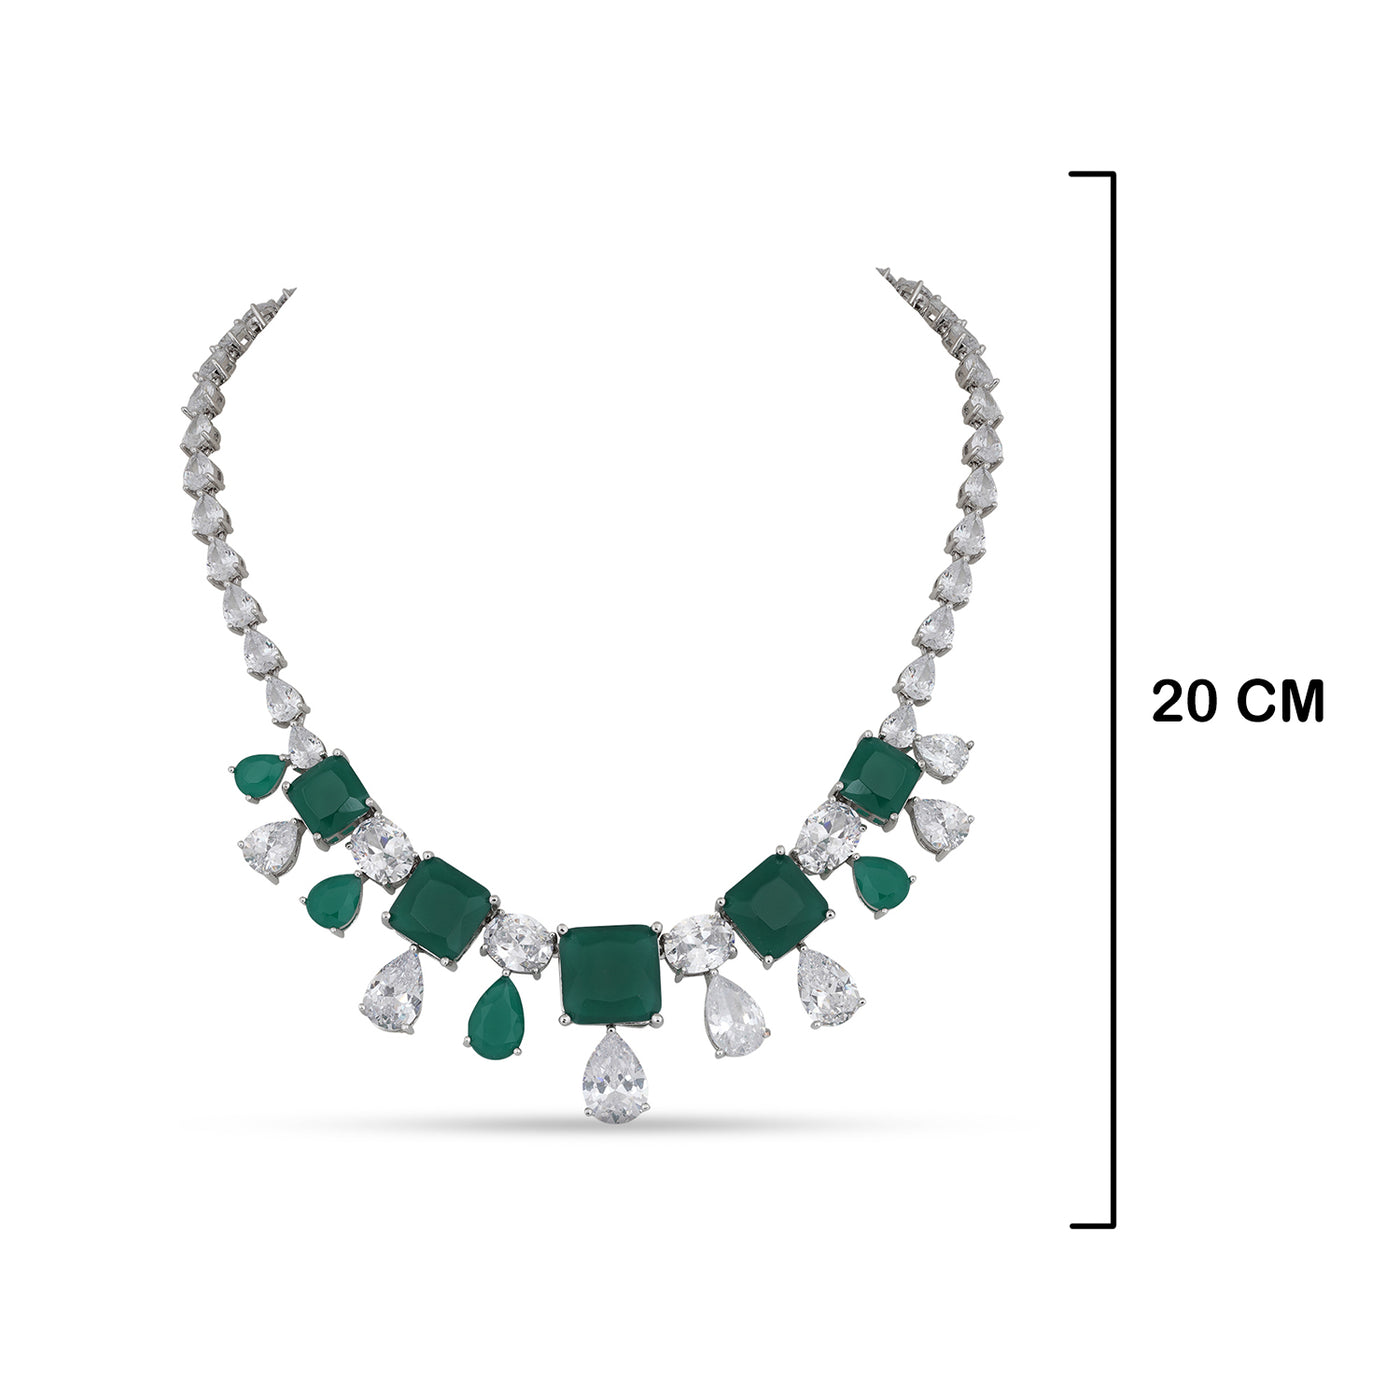 Cubic Zirconia Green Stone Necklace with measurements in cm. 20cm.